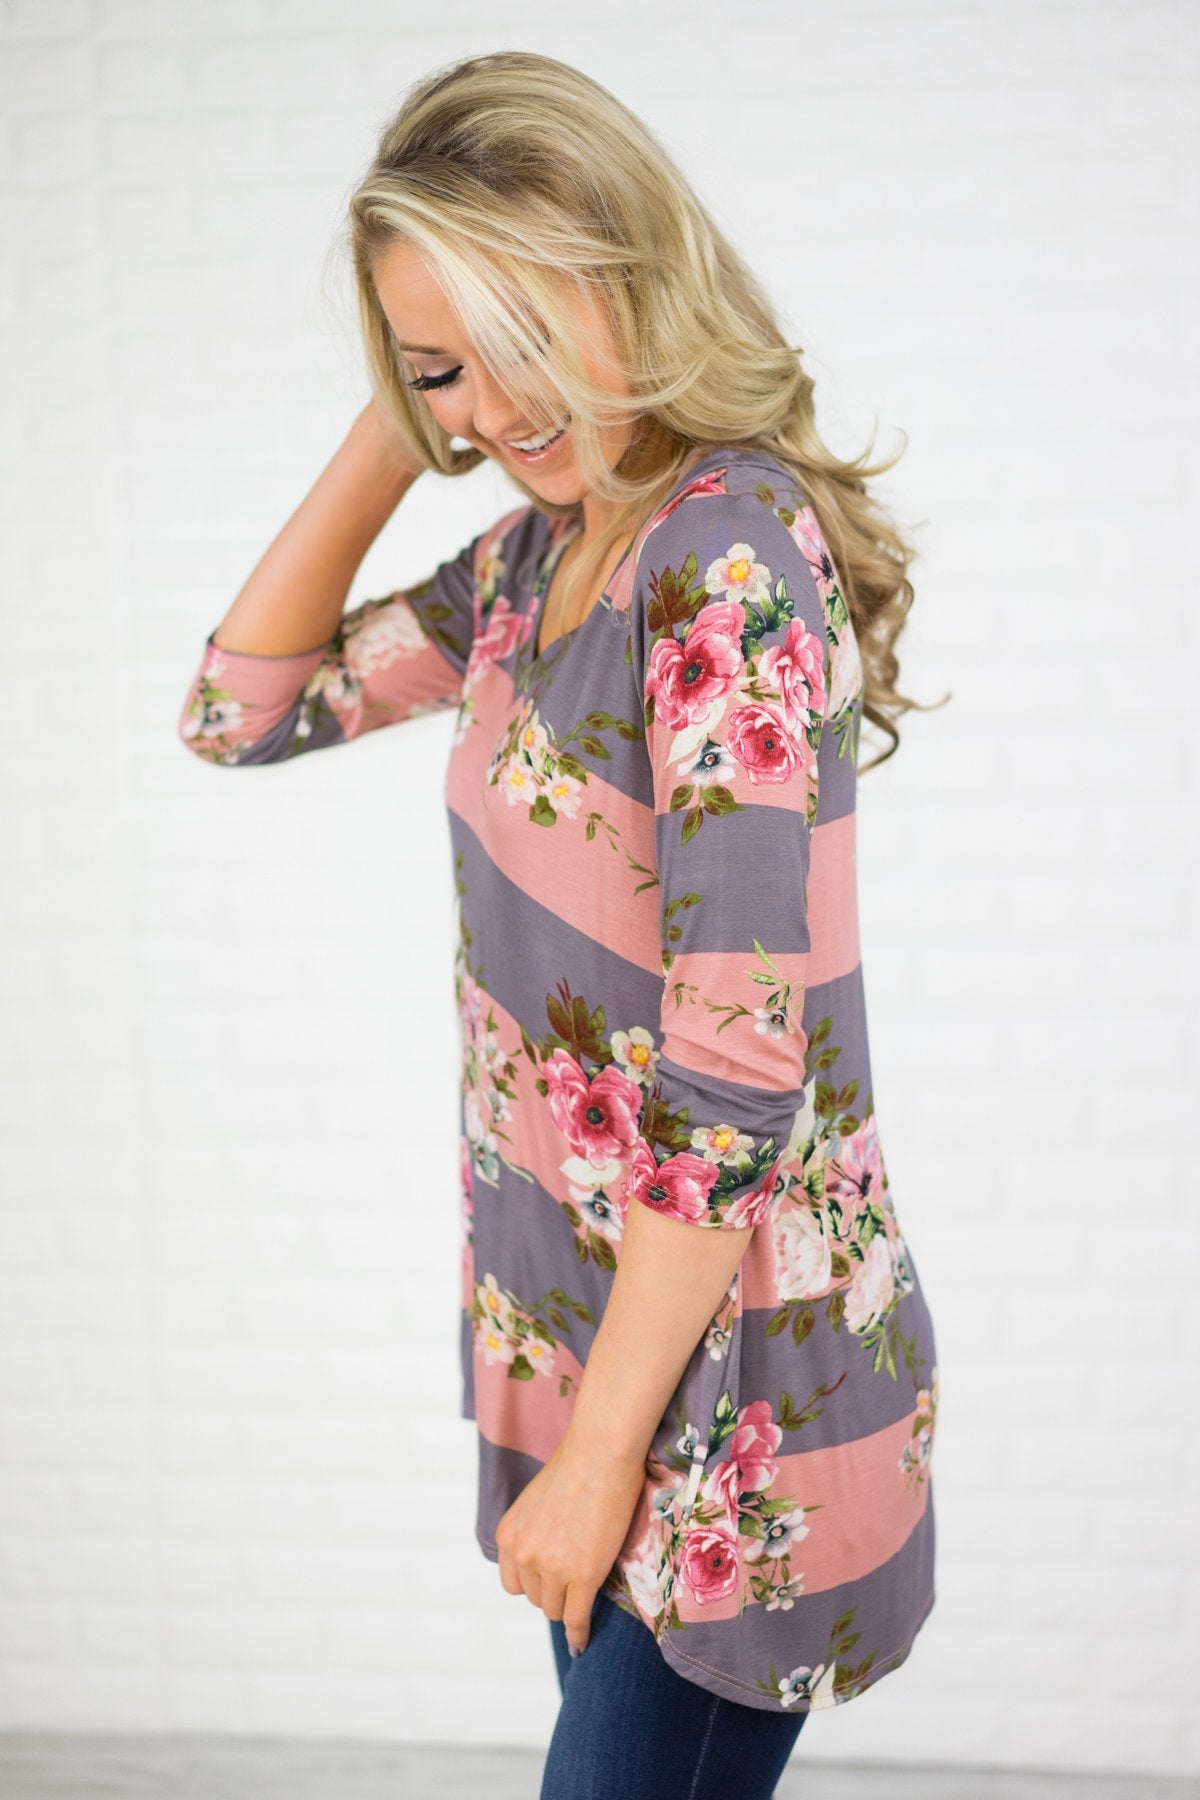 About Time 3/4 Sleeve Floral Top - Pink